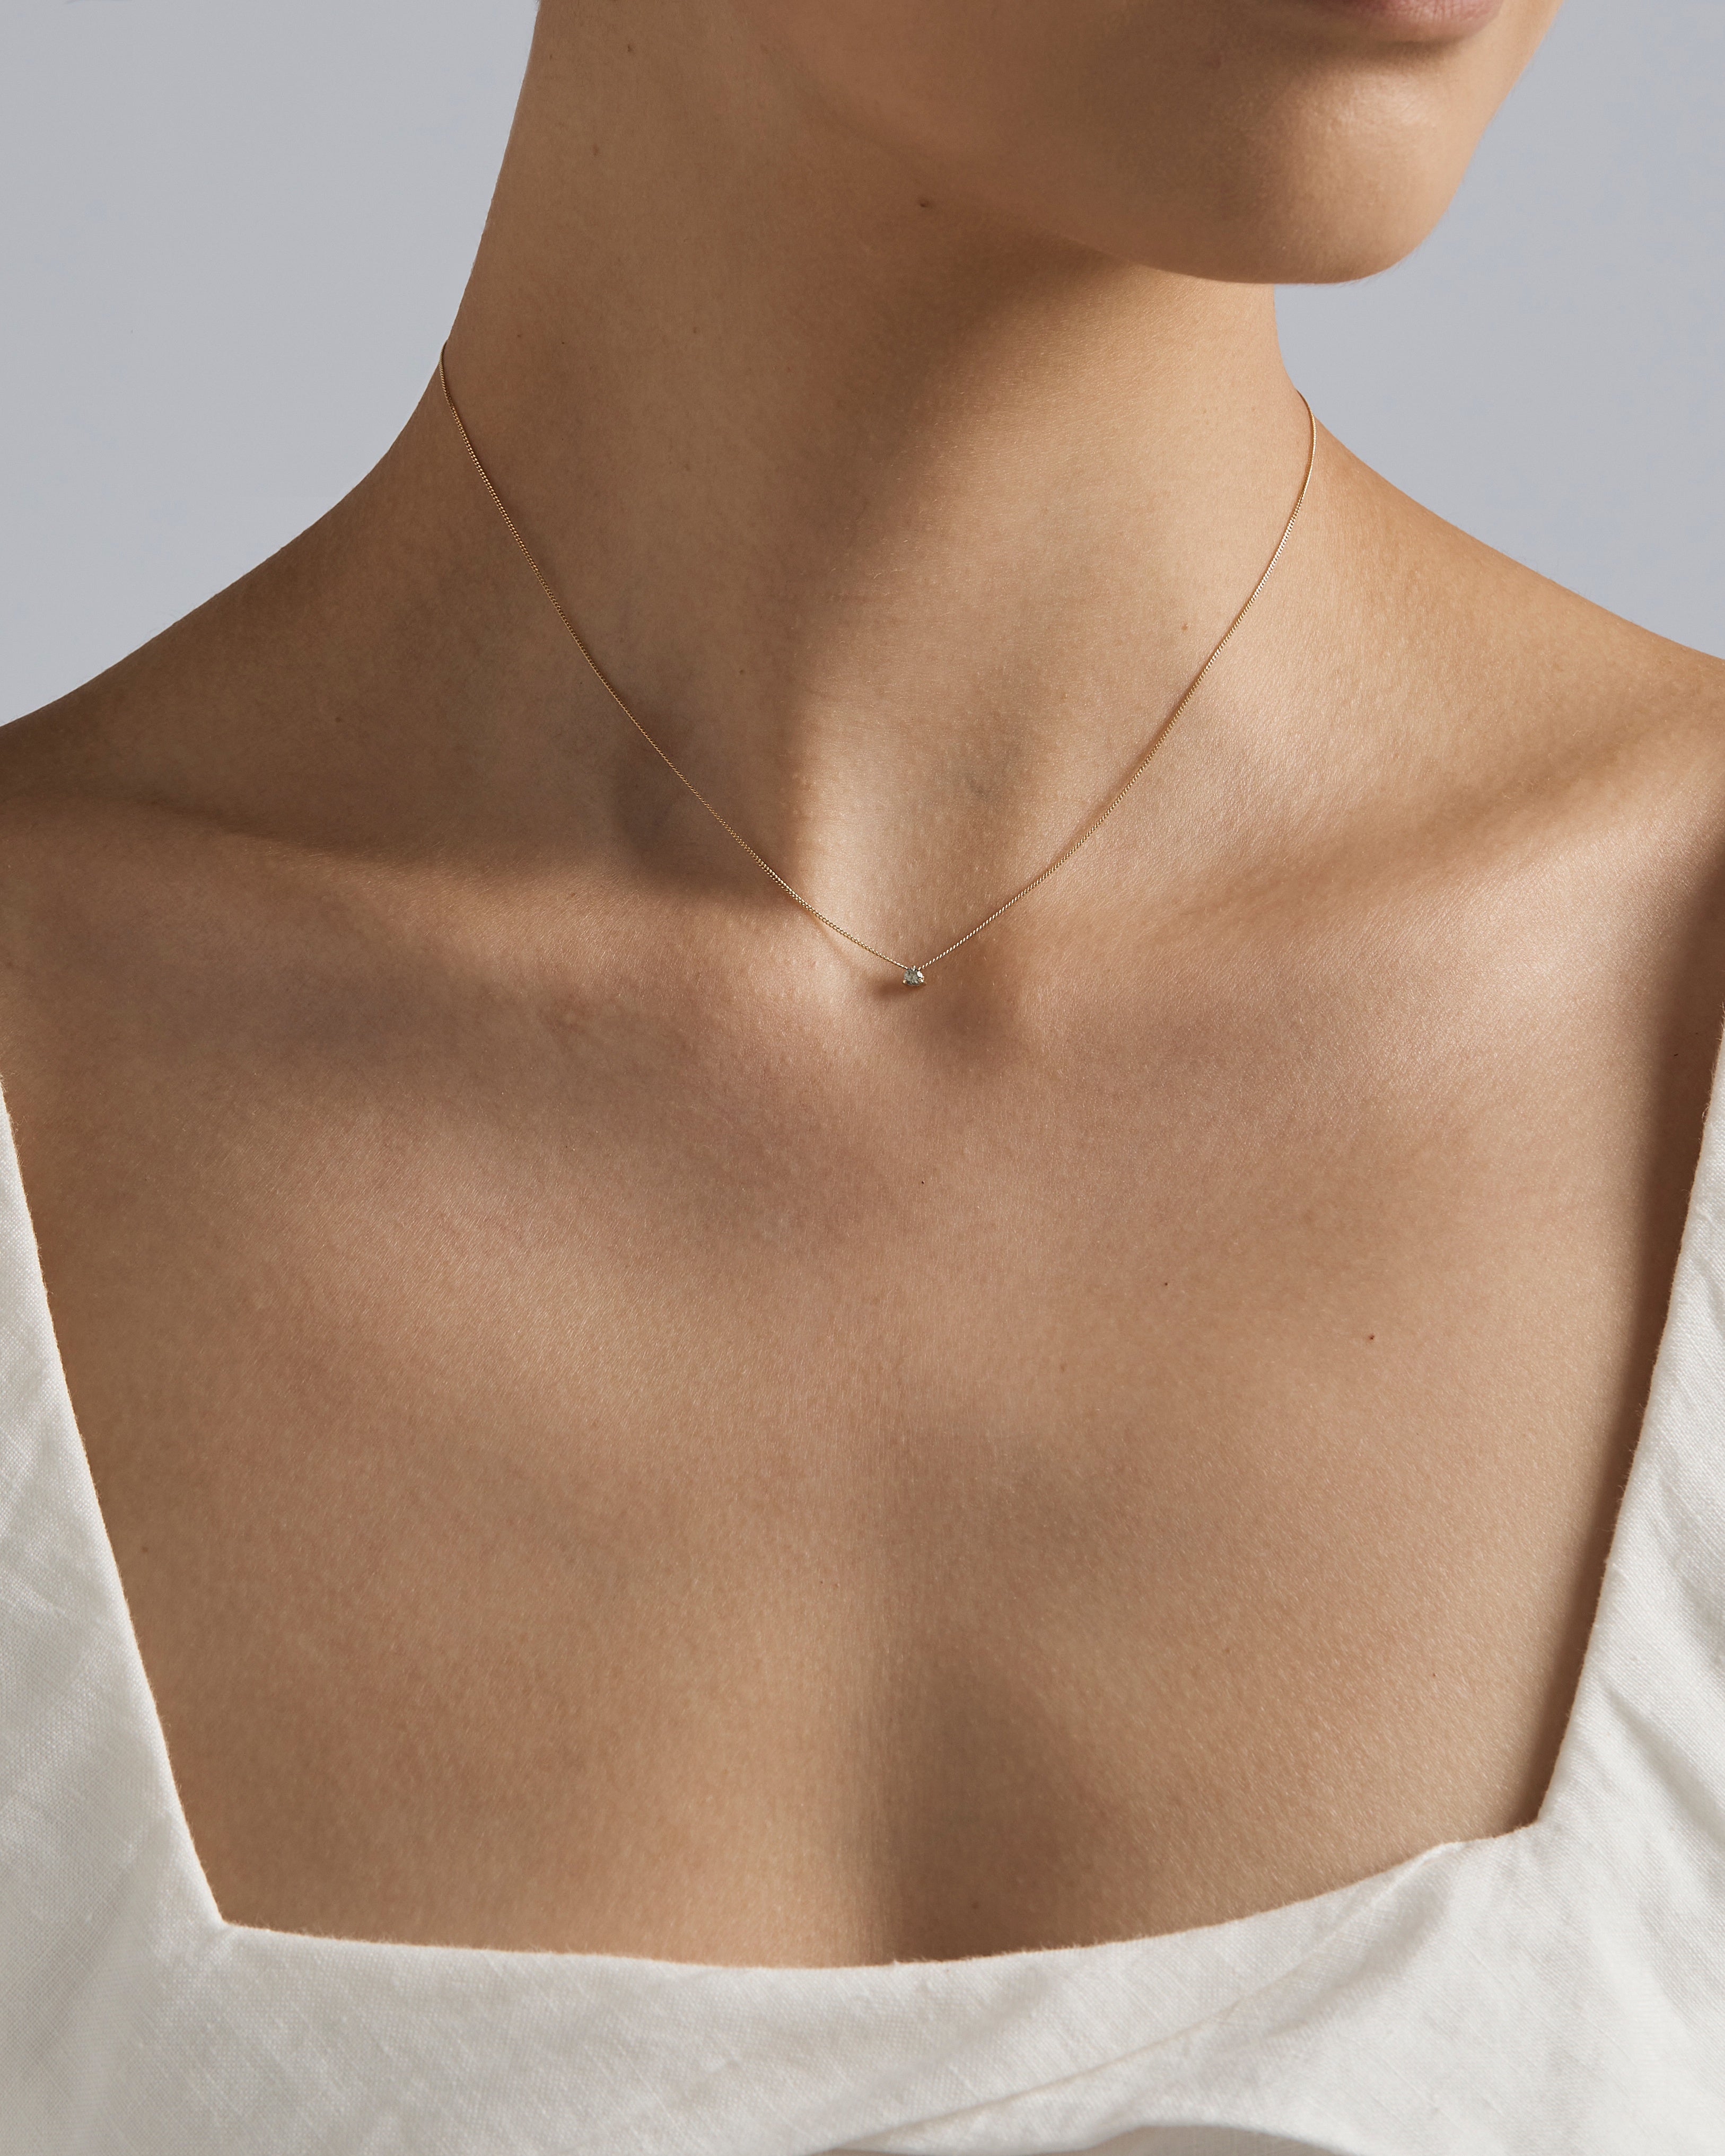 A woman wearing the Aiona Slider Necklace | Old Cut Diamond.